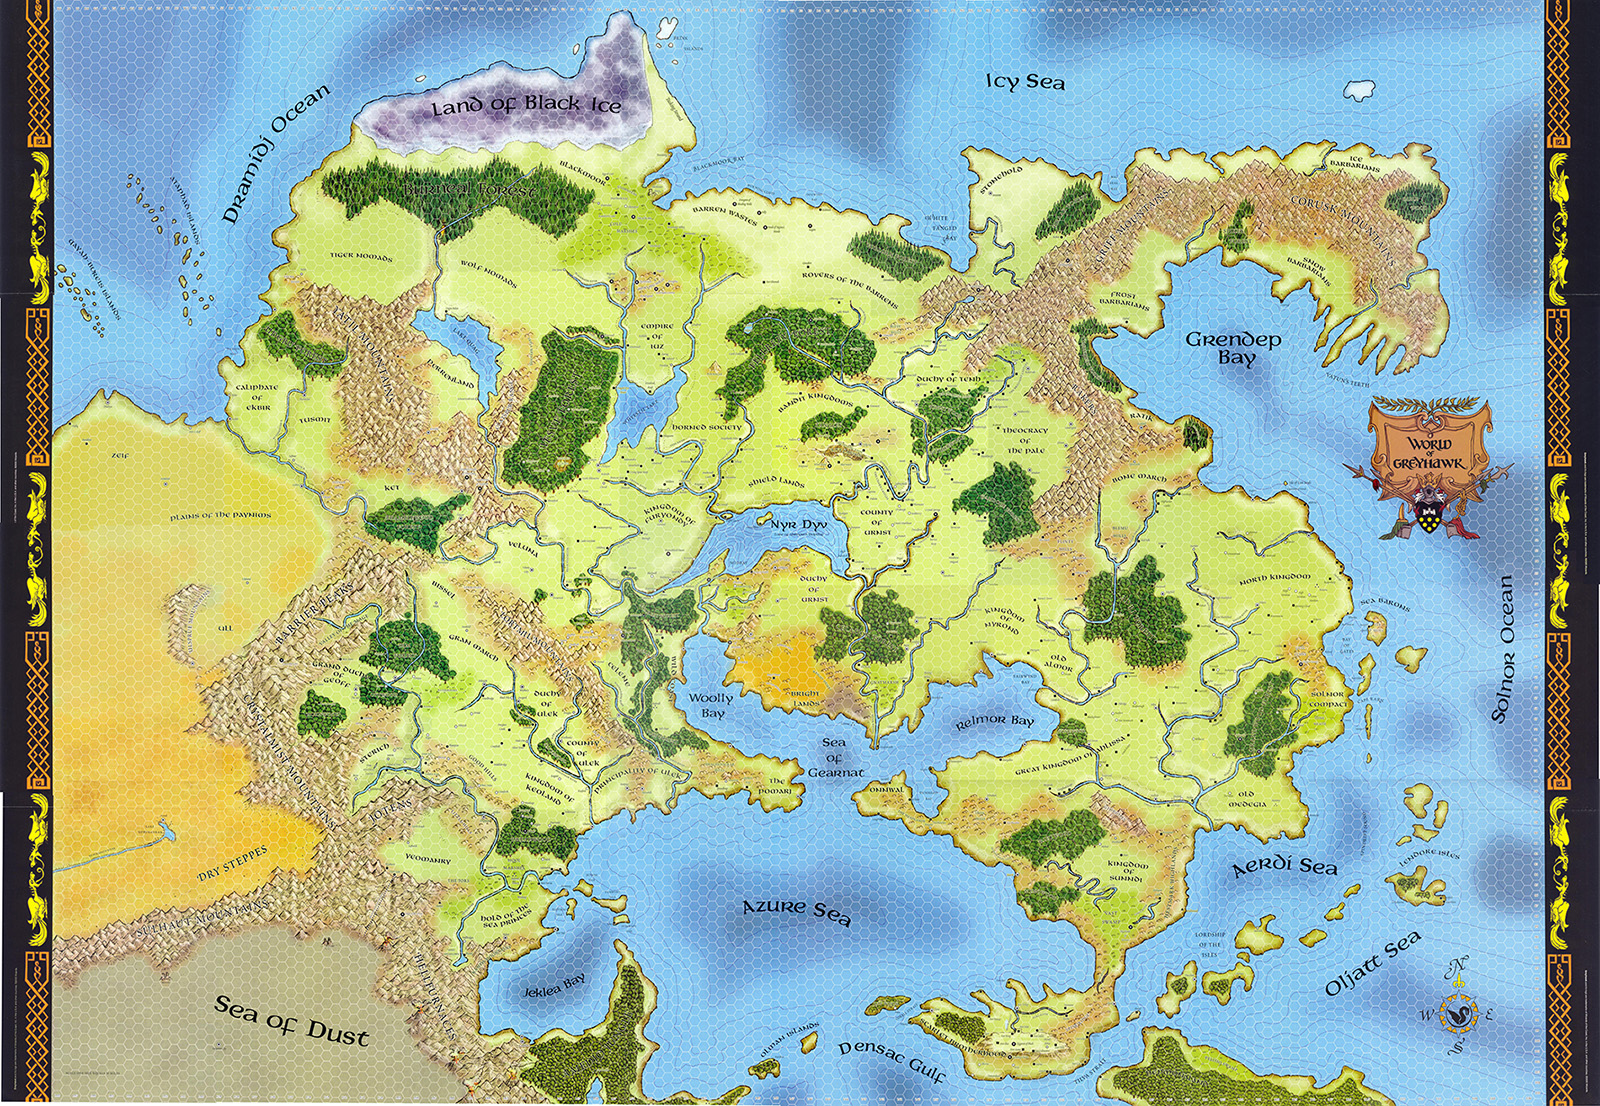 Map of the World of Greyhawk fantasy game setting.